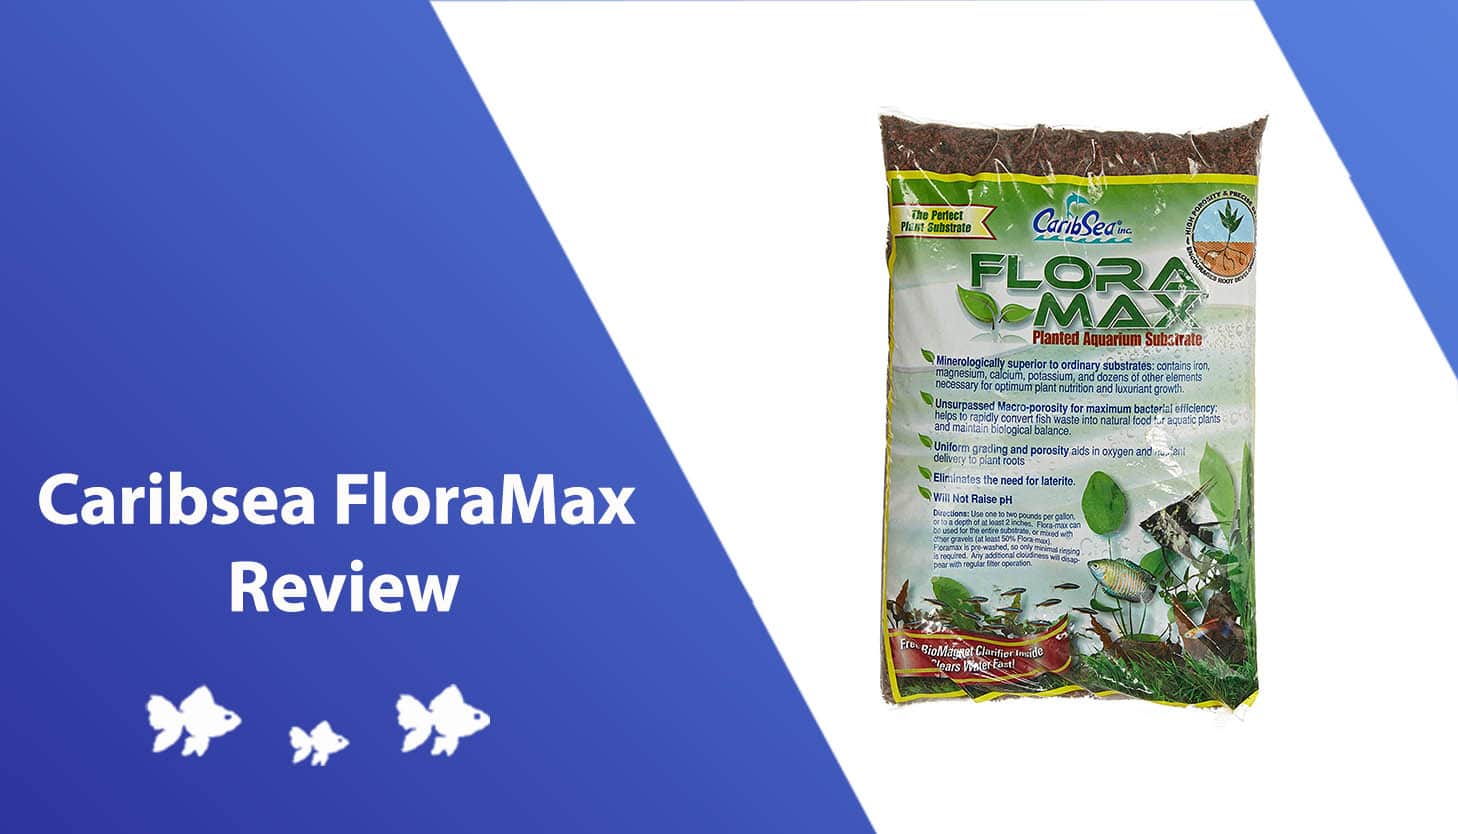 Caribsea FloraMax Review